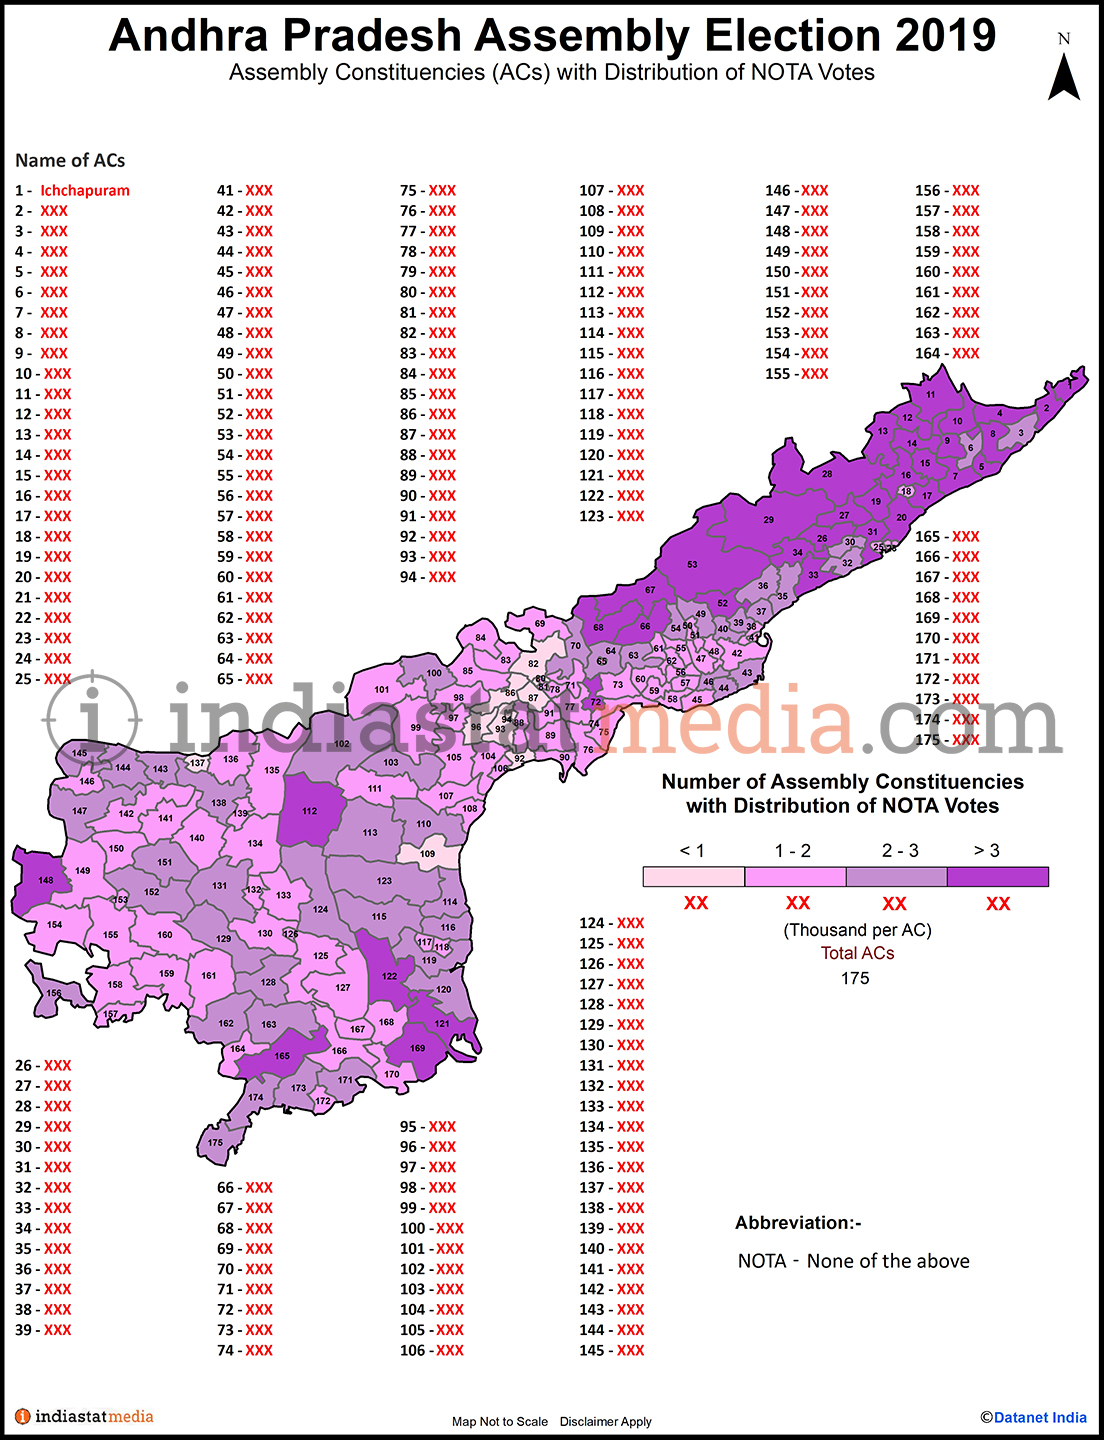 Distribution of NOTA Votes by Constituencies in Andhra Pradesh (Assembly Election - 2019)